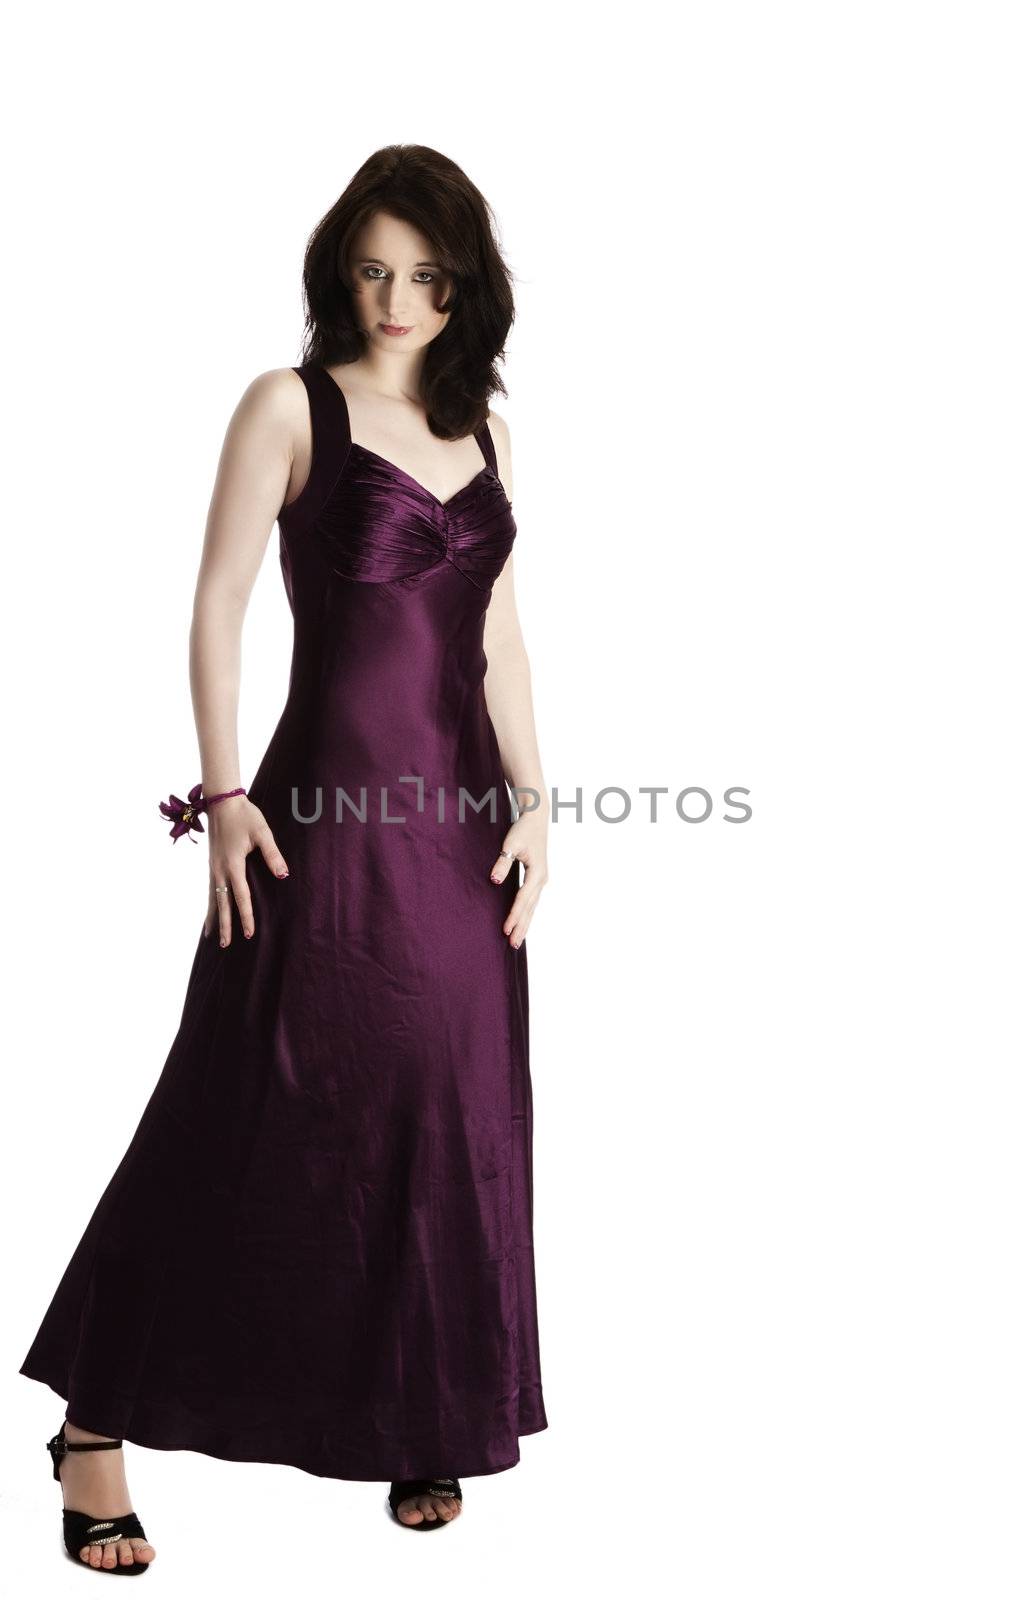 young woman in purple evening dress by RobStark